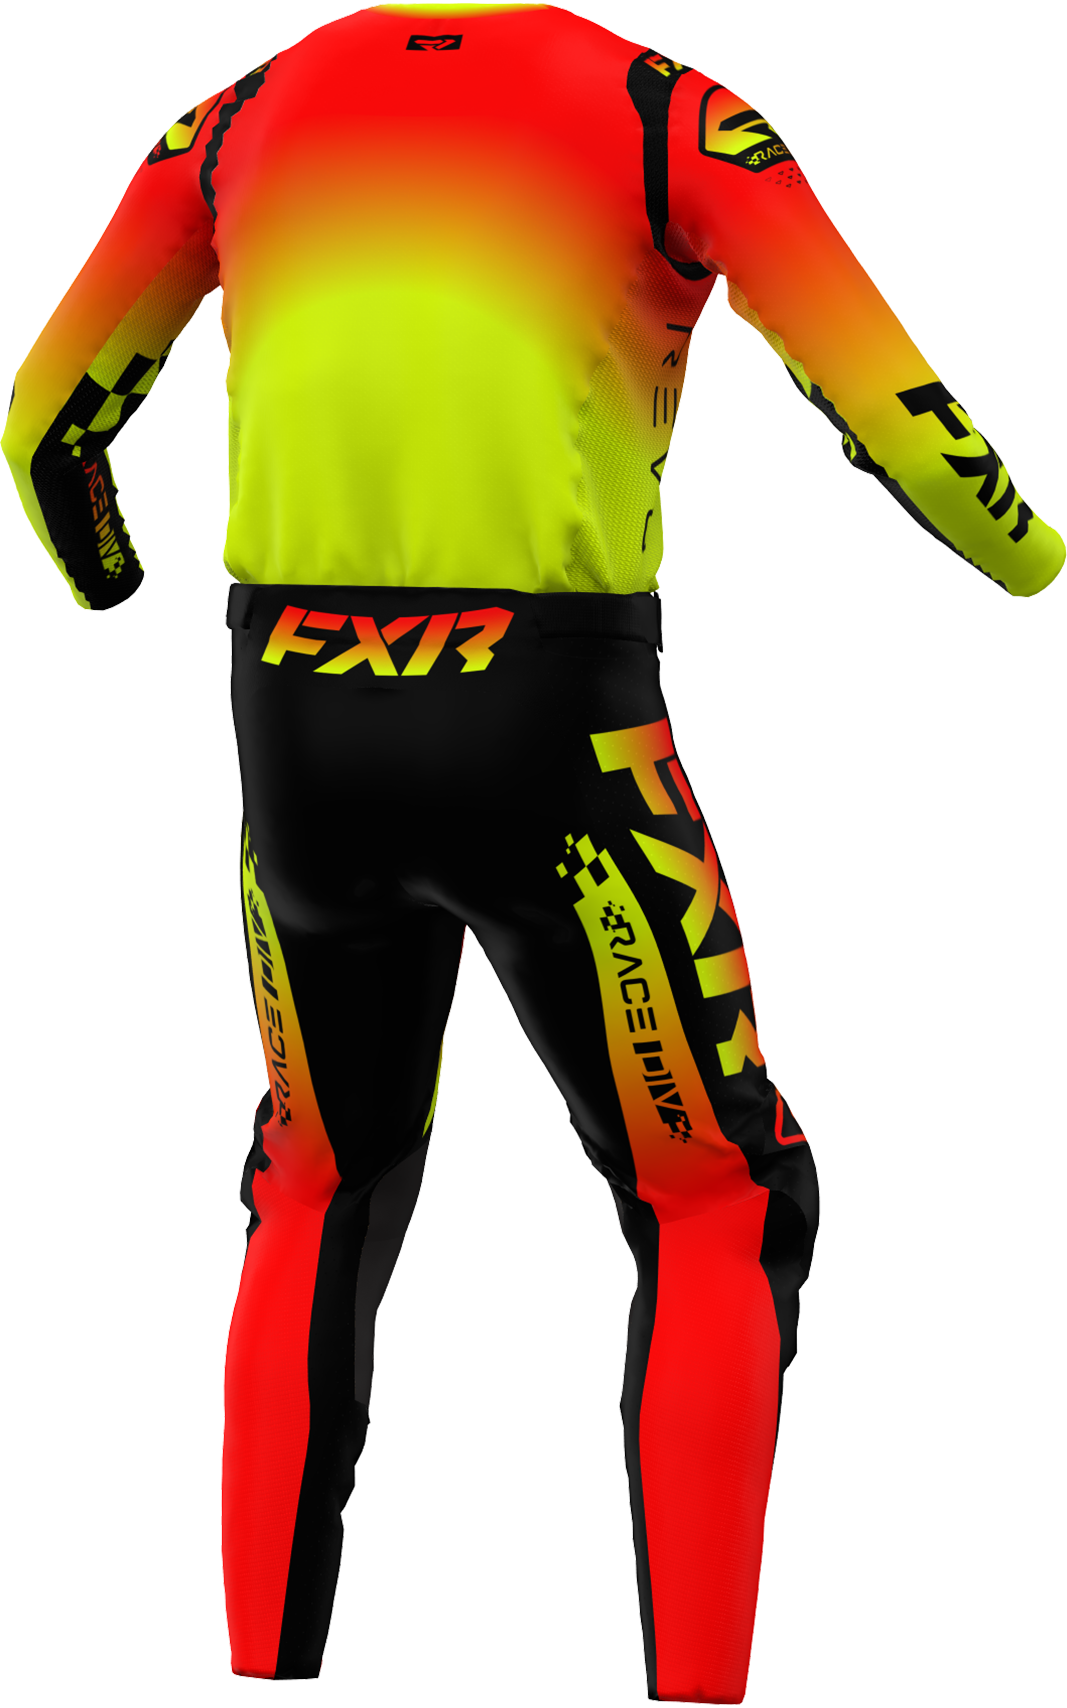 A 3D image of FXR's Revo Comp MX Jersey and Pant in Tequila Sunset colorway